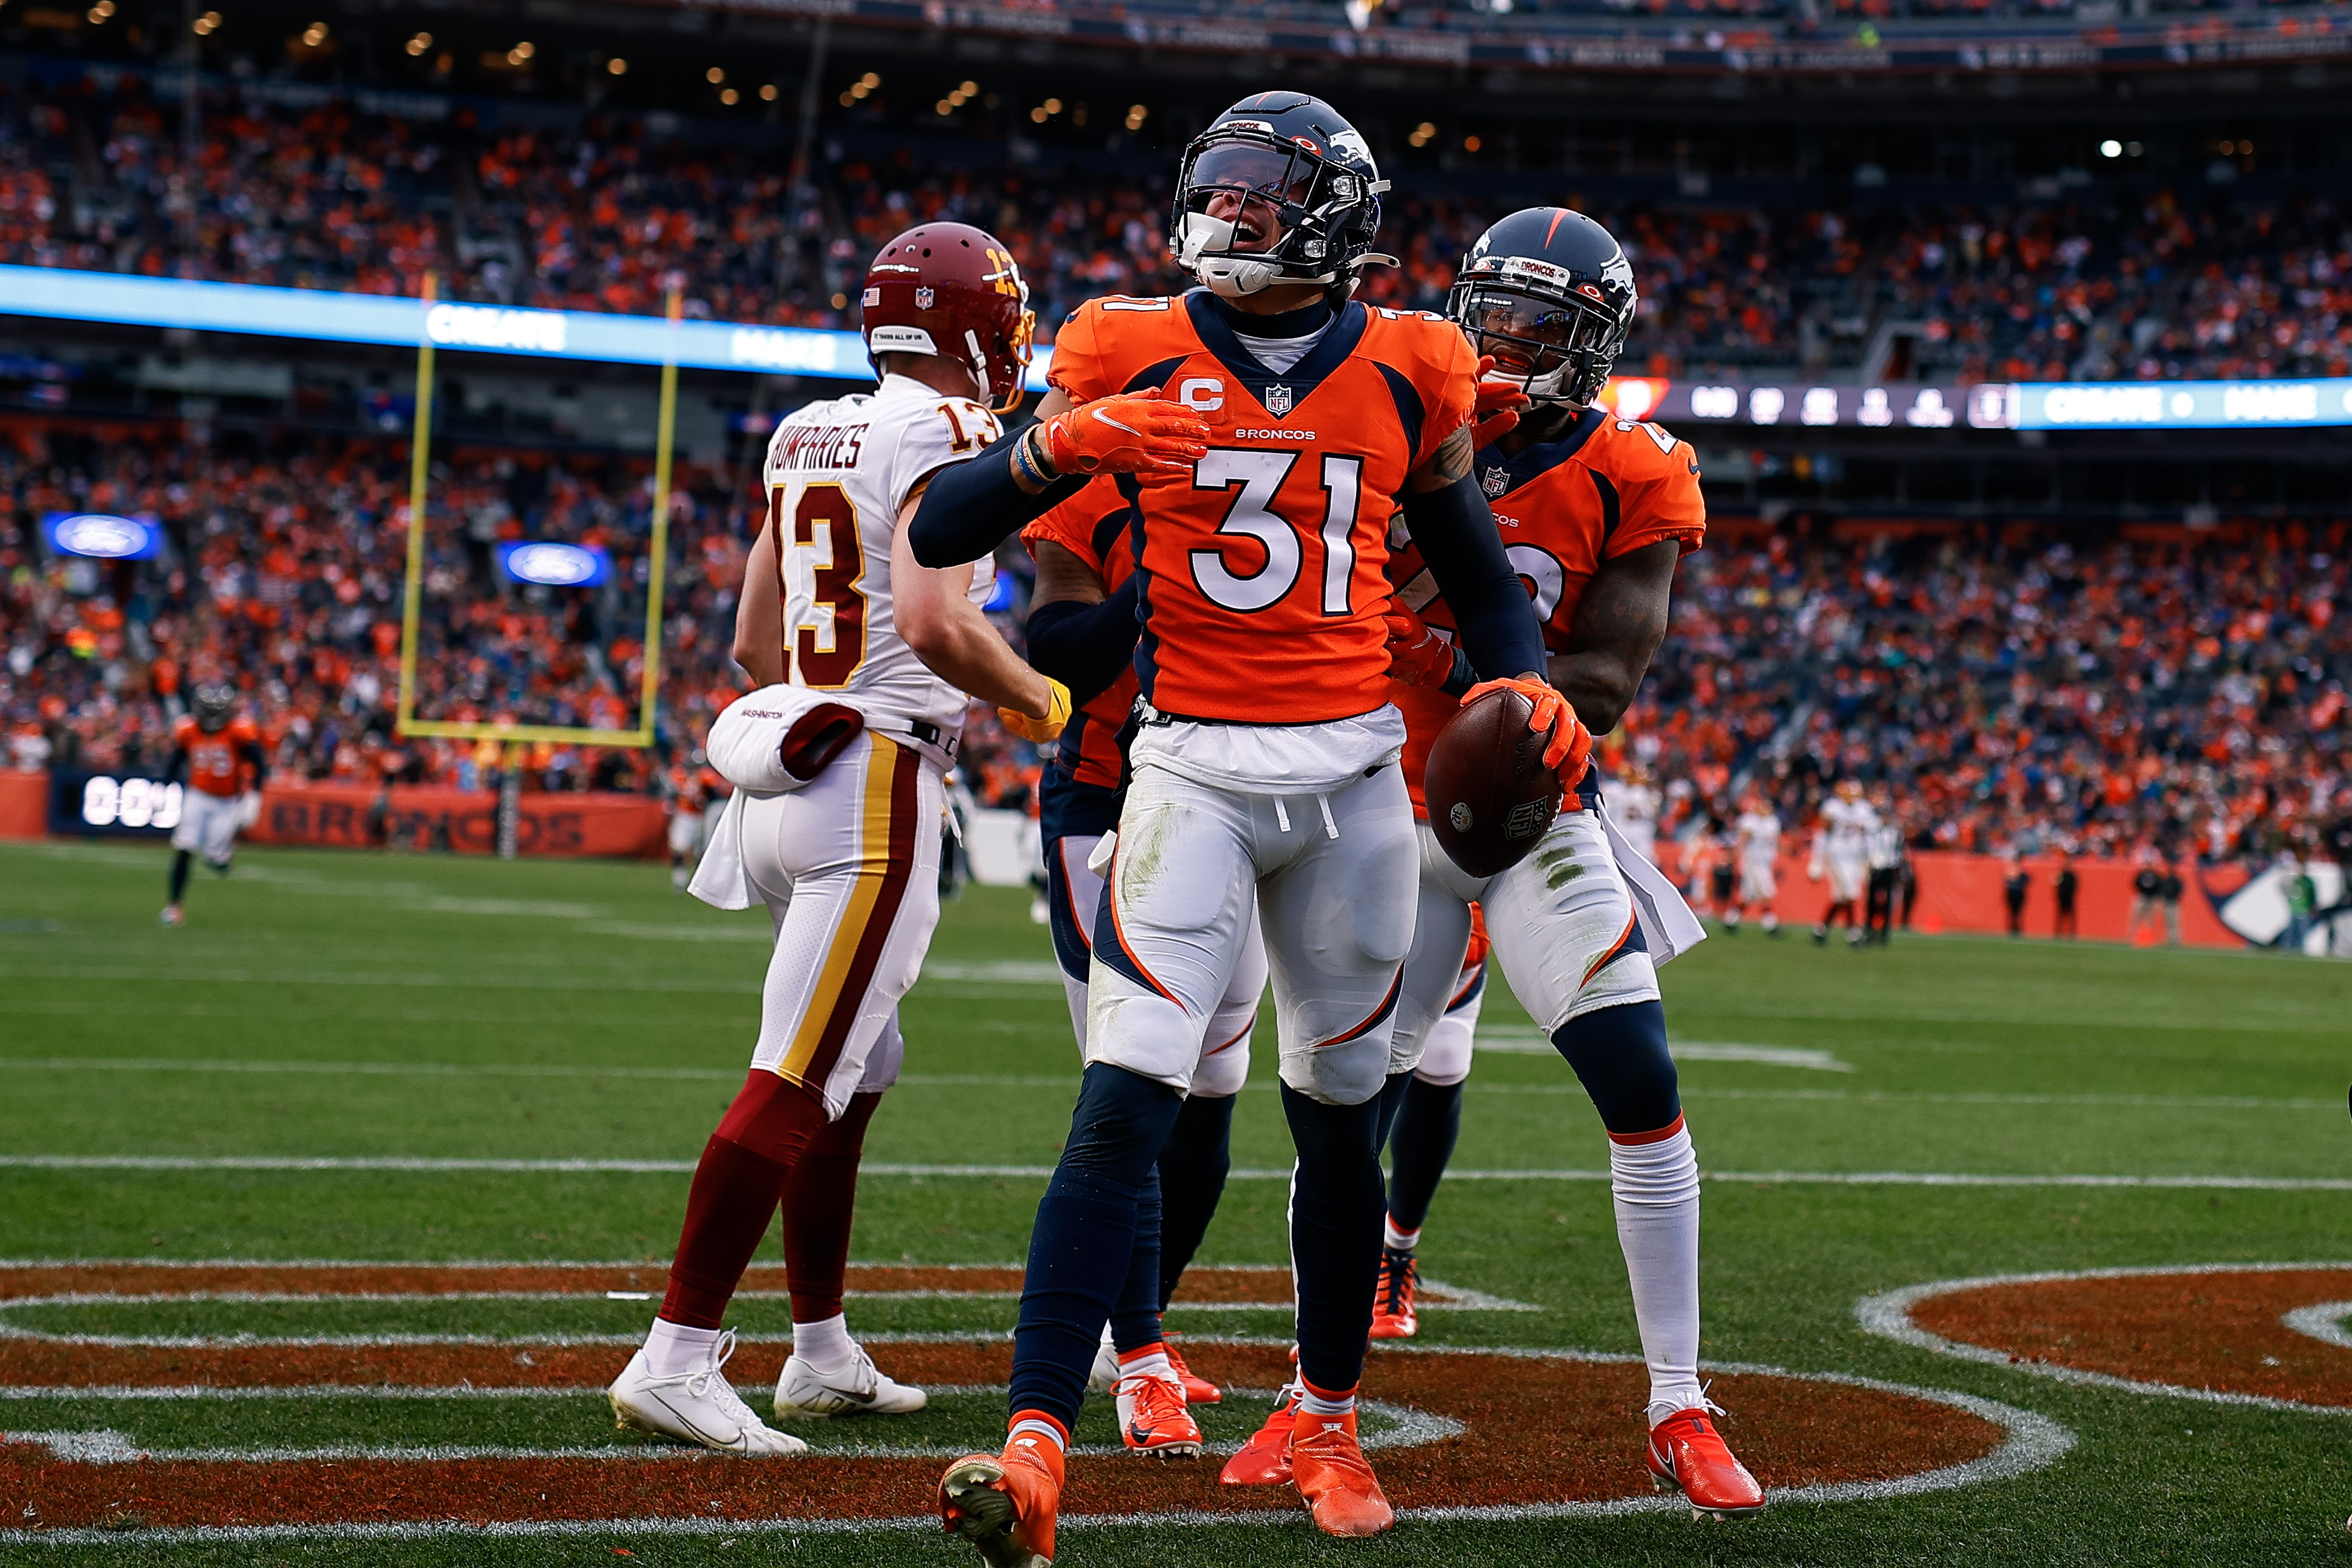 Denver Broncos safety Justin Simmons (31) celebrates with safety Kareem Jackson (22) after an interception in the second quarter against the Washington Football Team at Empower Field at Mile High.